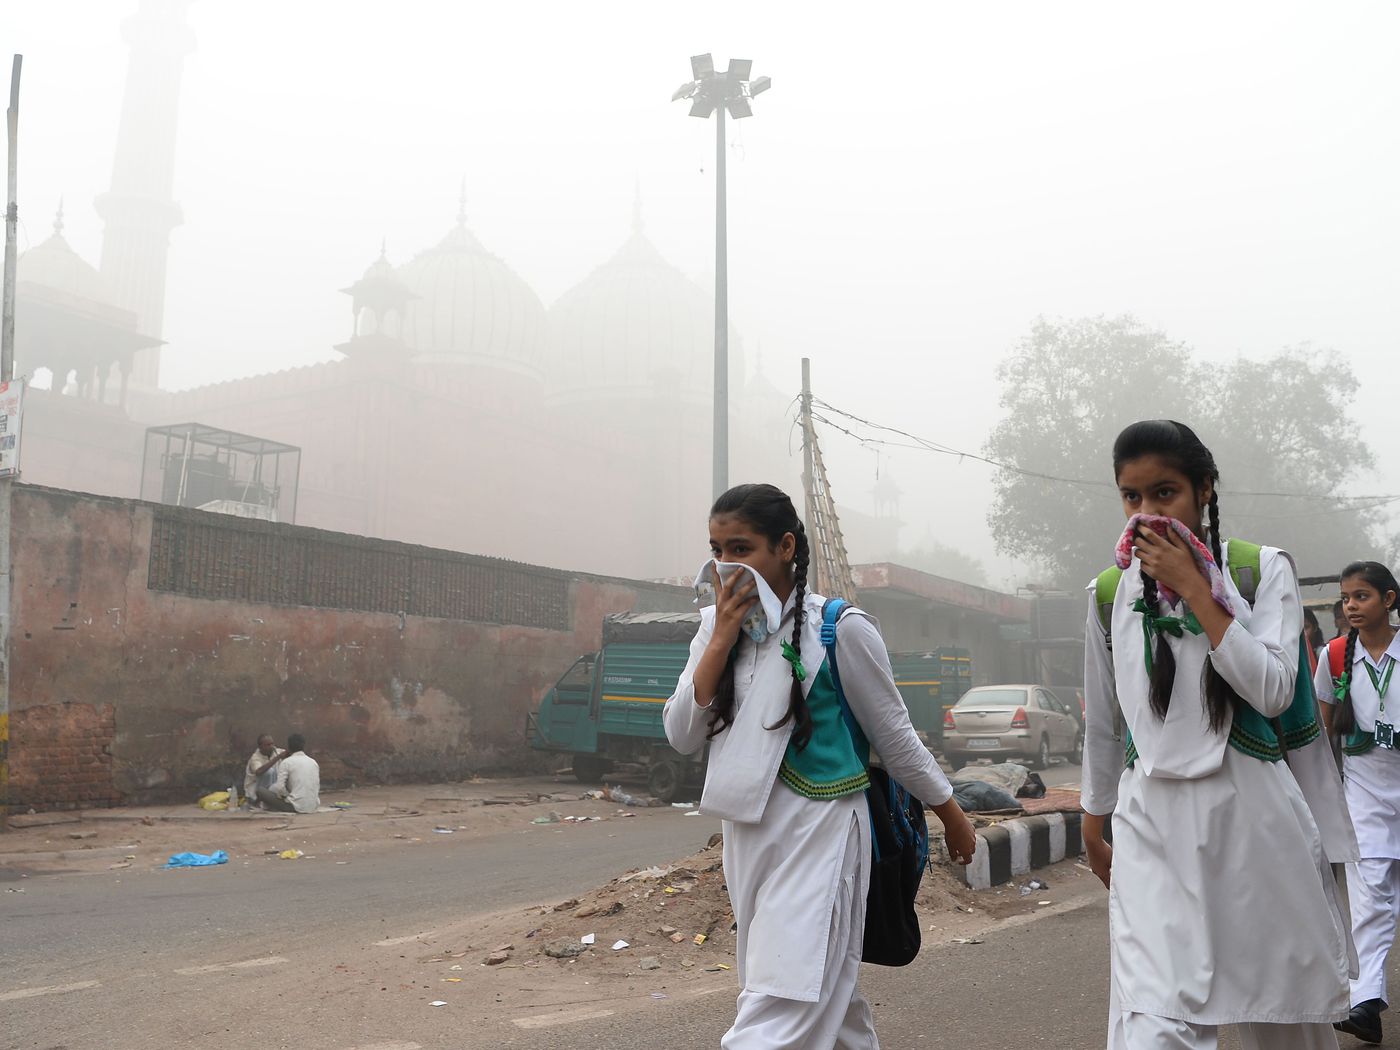 Delhi the capital of the country has become polluted